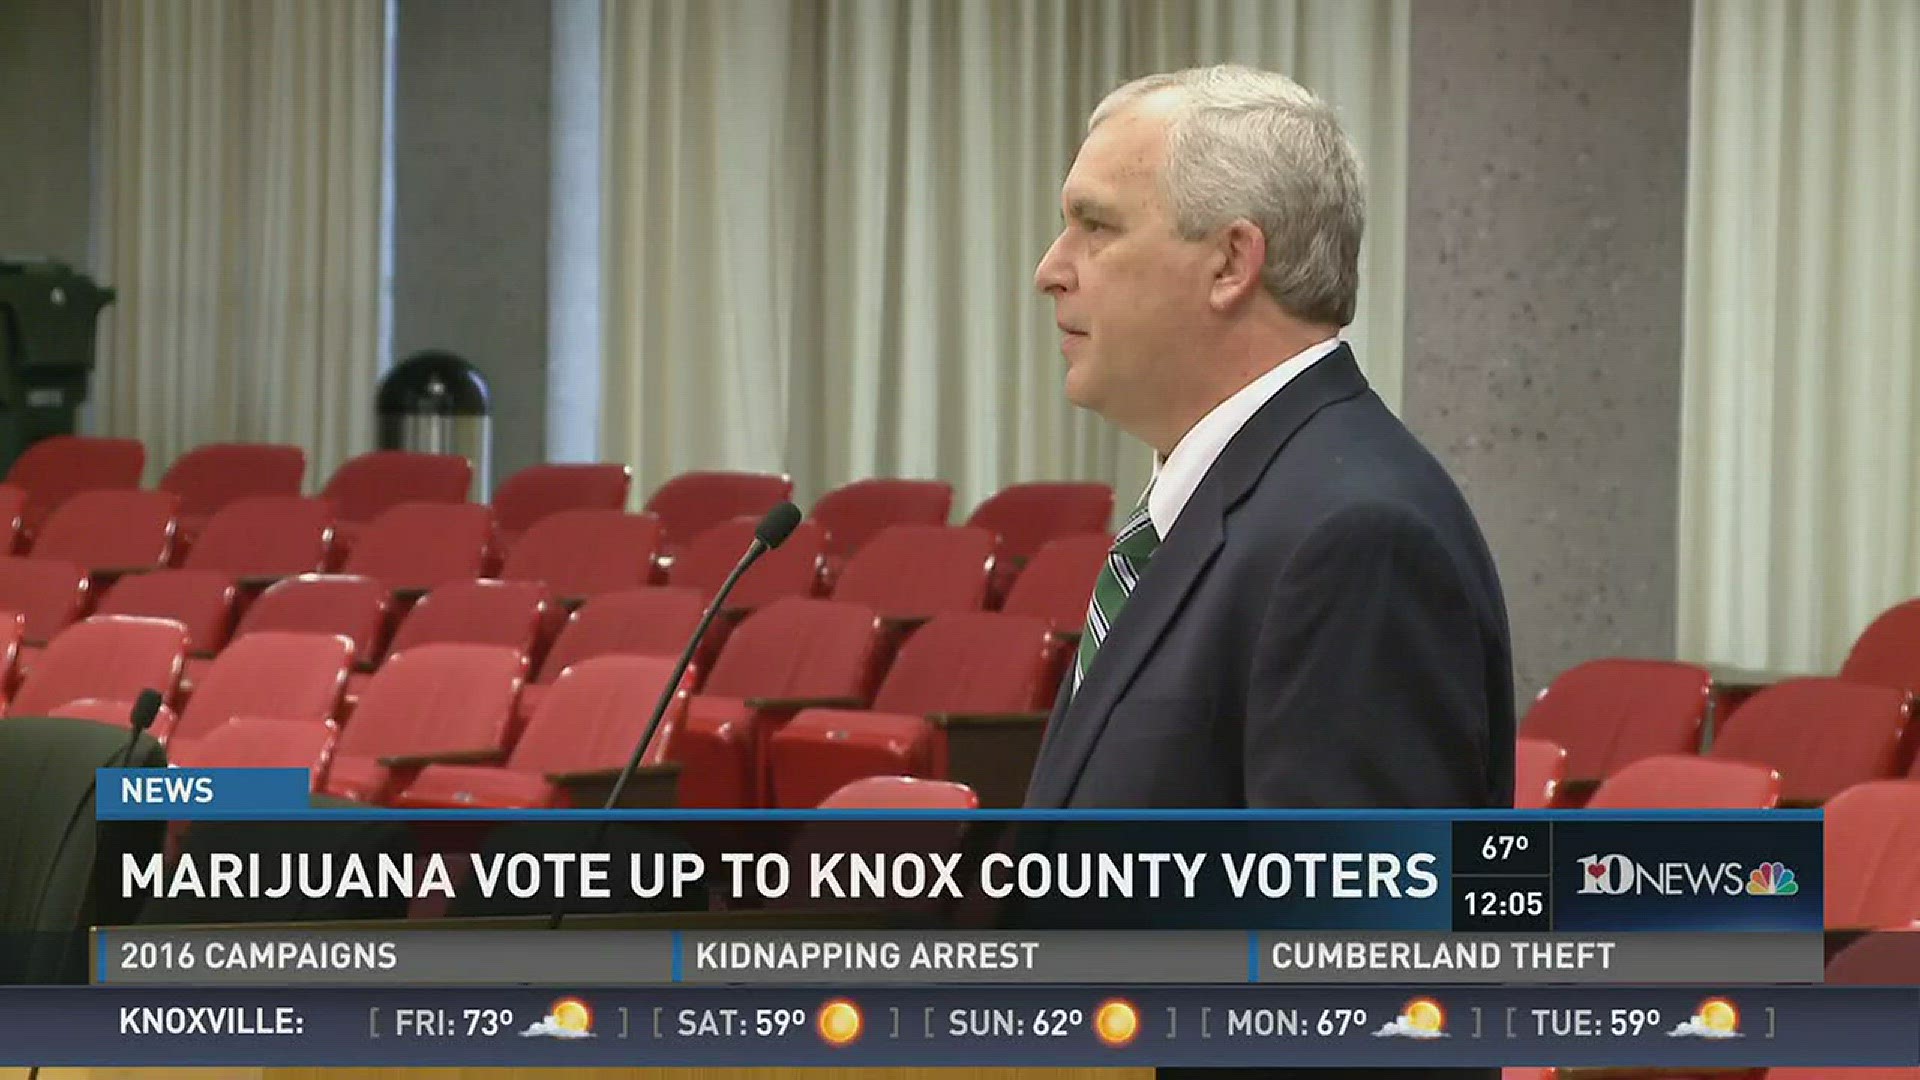 Steve Cooper, who is spearheading the initiative, will now have until June 15 to get about 16,100 signatures from registered Knox County voters to put the two questions on the November ballot.